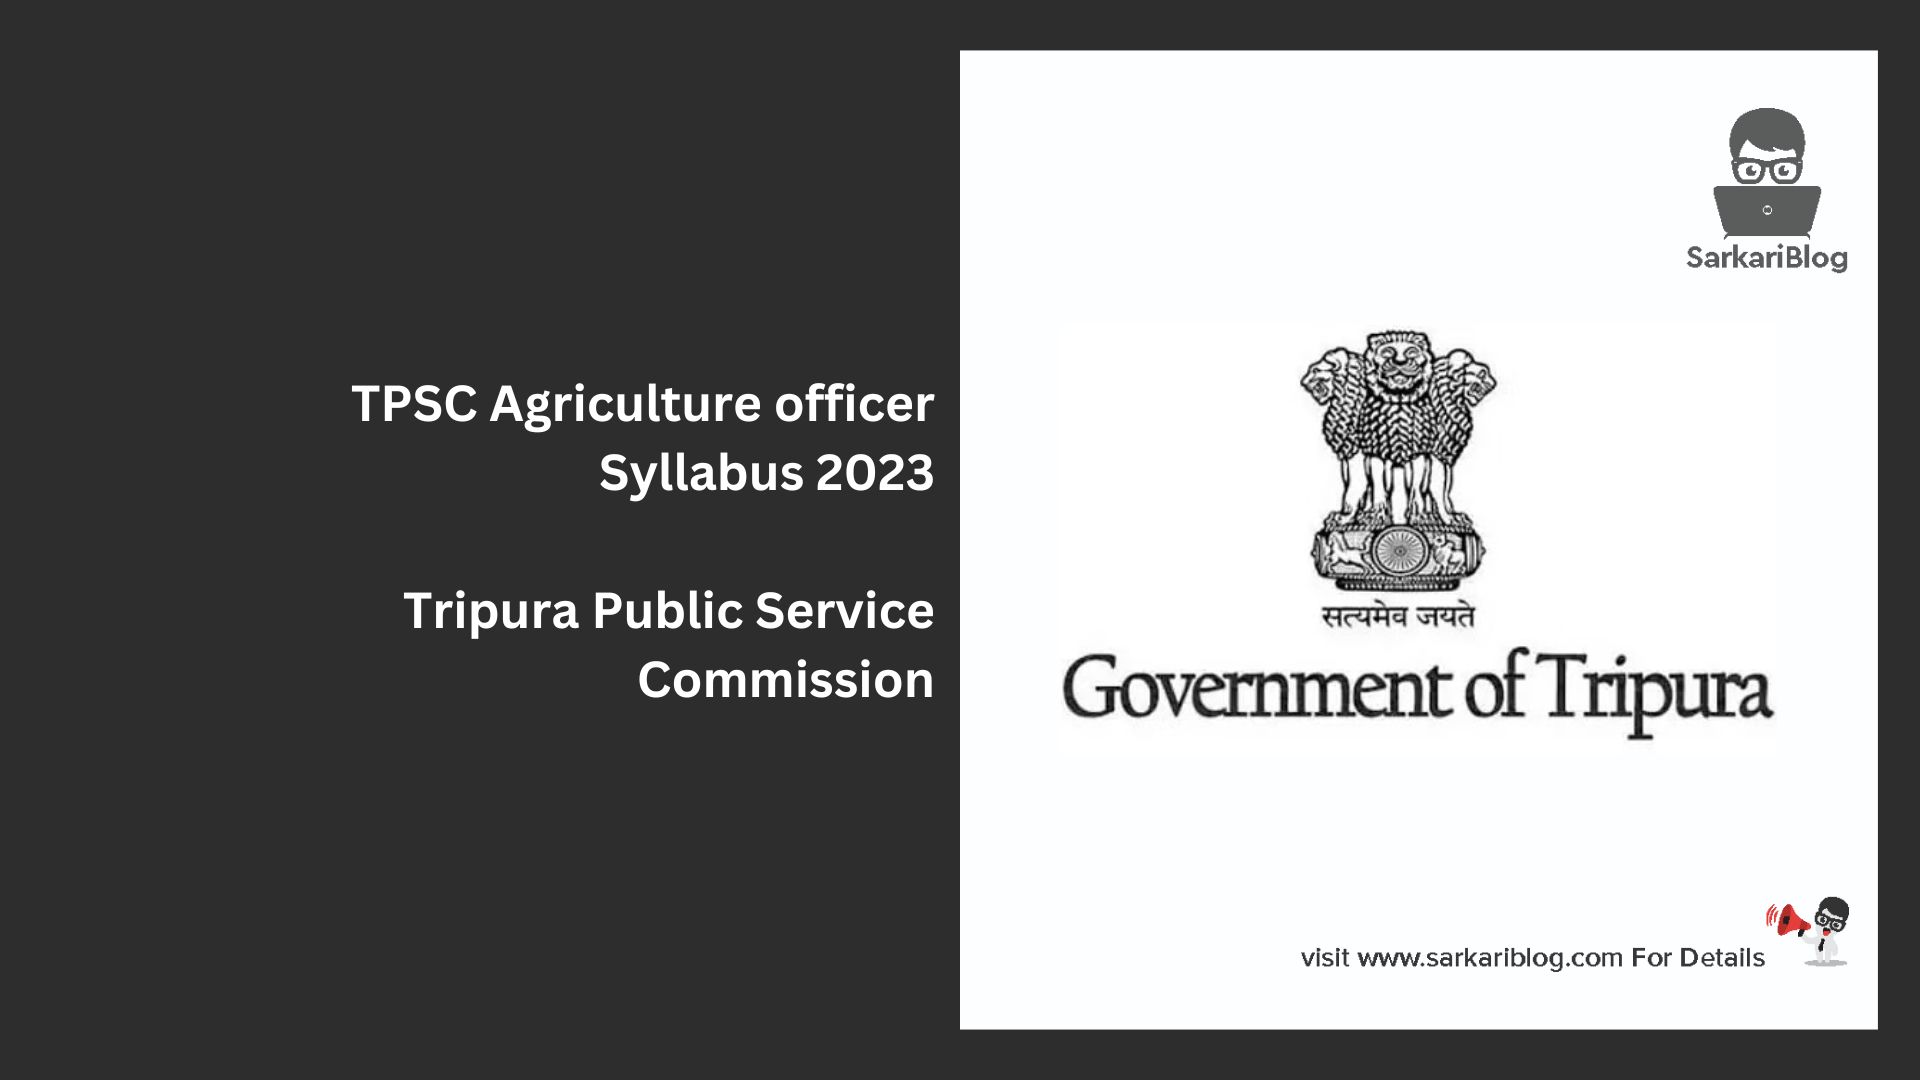 TPSC Agriculture officer Syllabus 2023